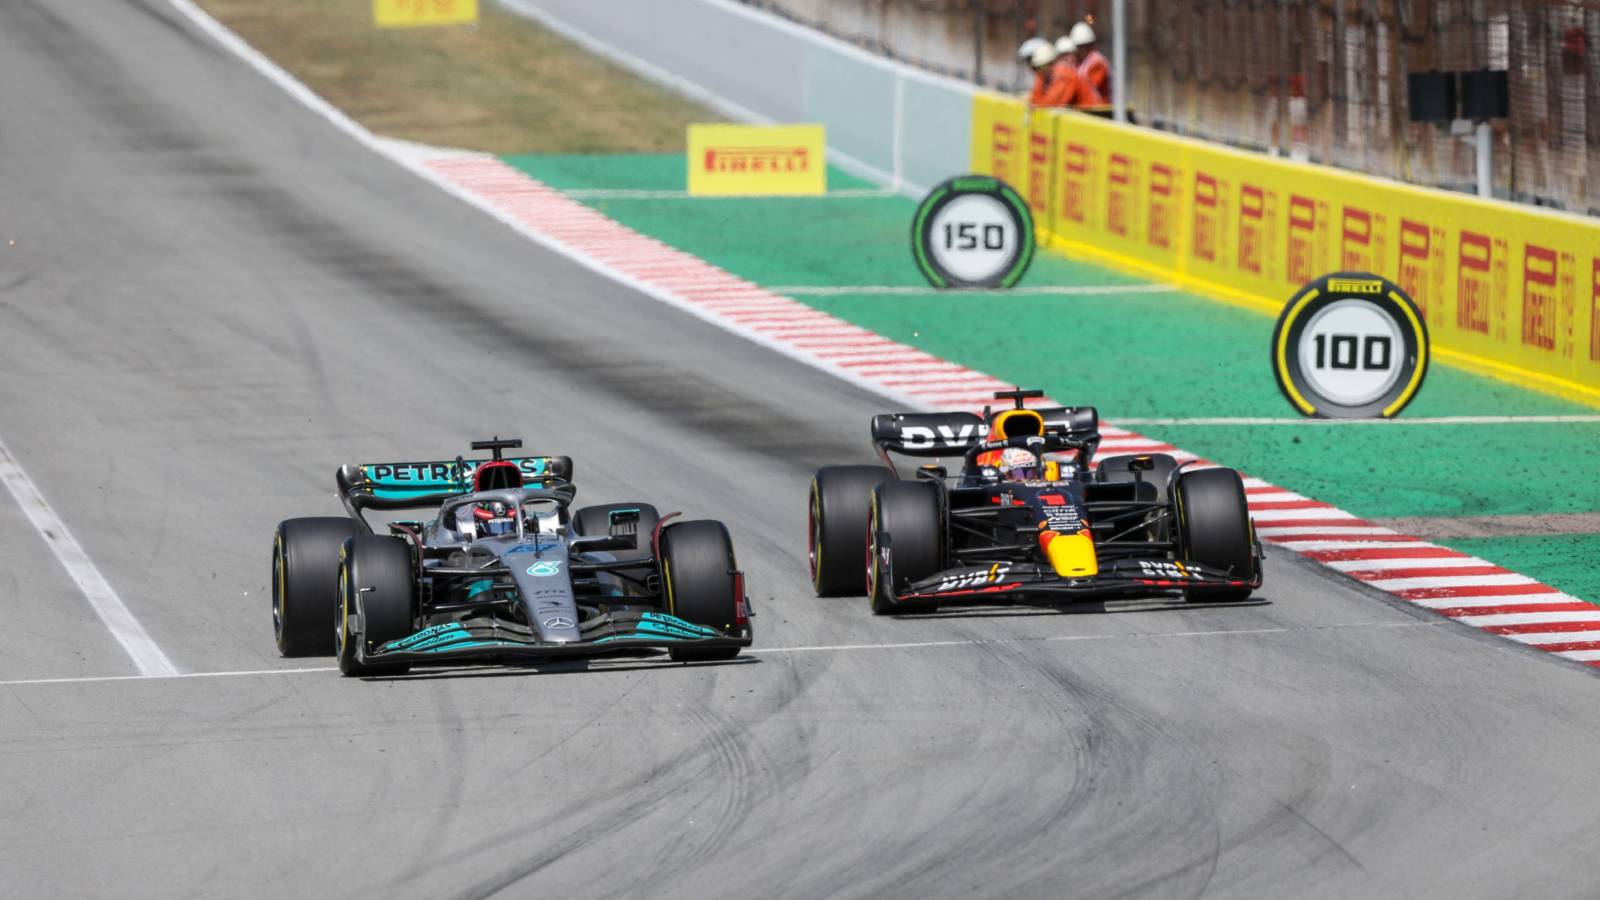 Max Verstappen, Red Bull, tries to pass George Russell, Mercedes. Barcelona May 2022.